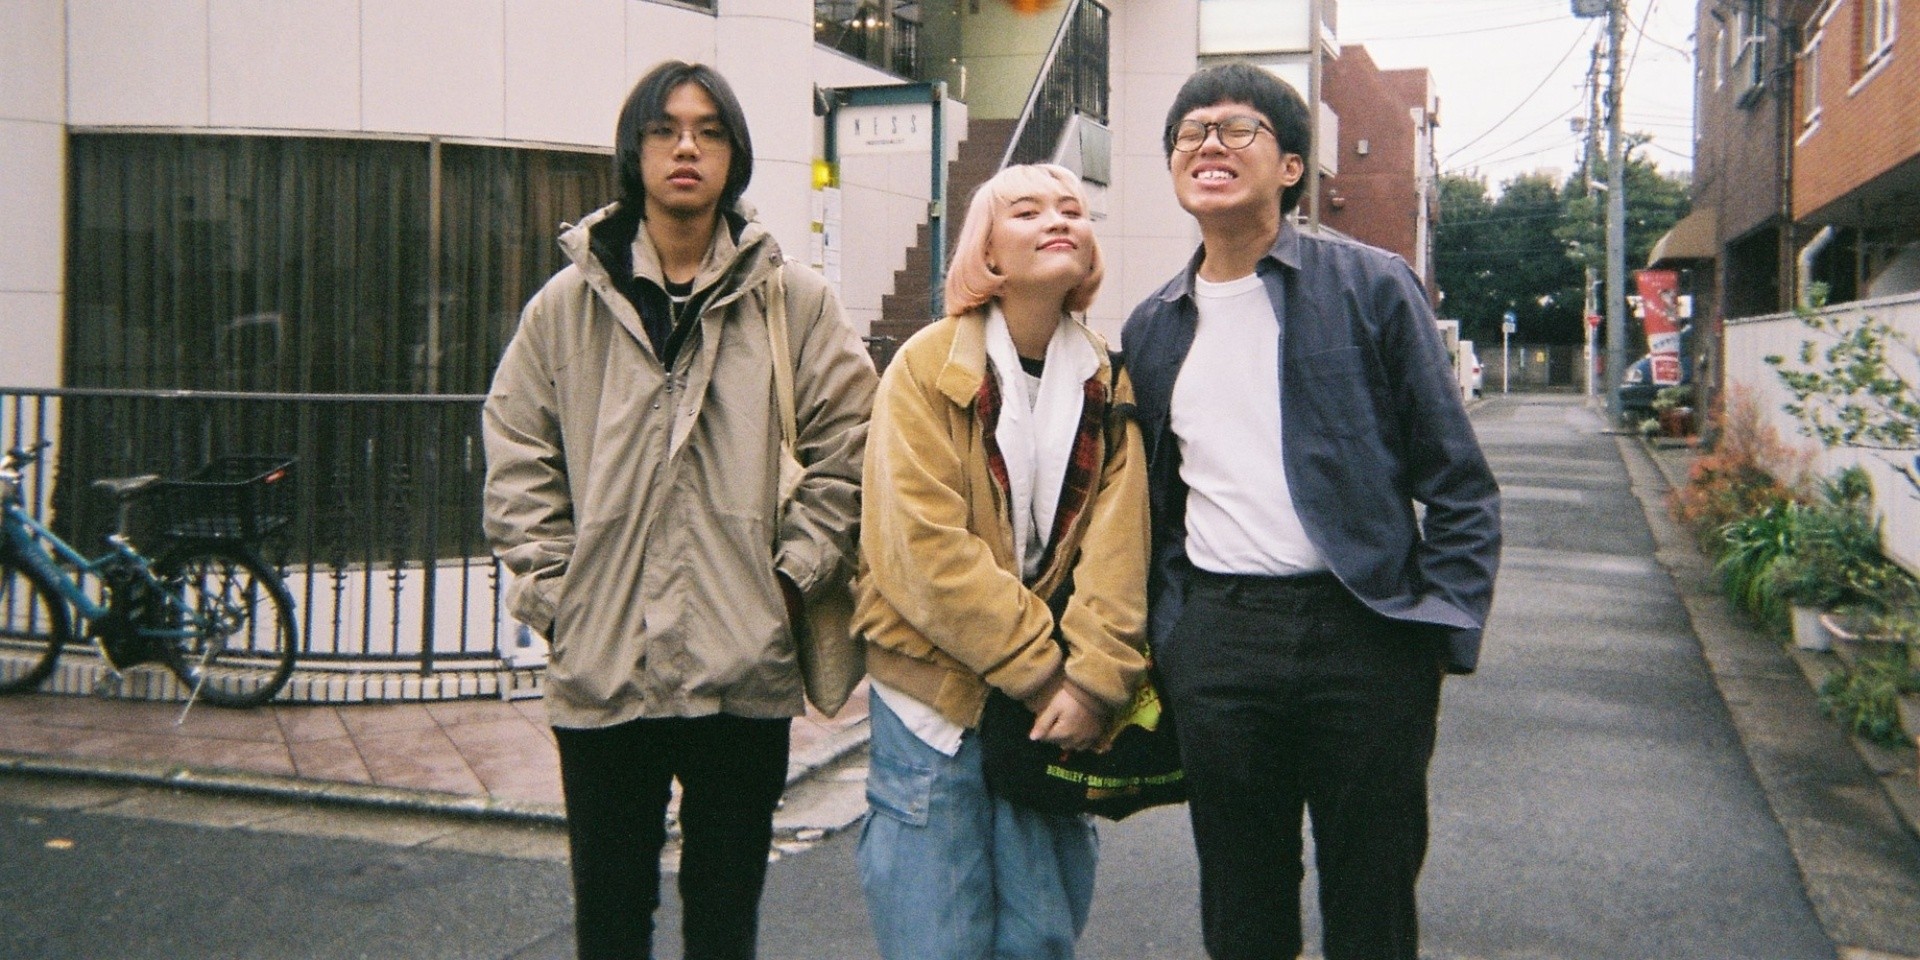 "I'm proud to be in this community of Asian bands": An interview with Sobs about its Japan tour